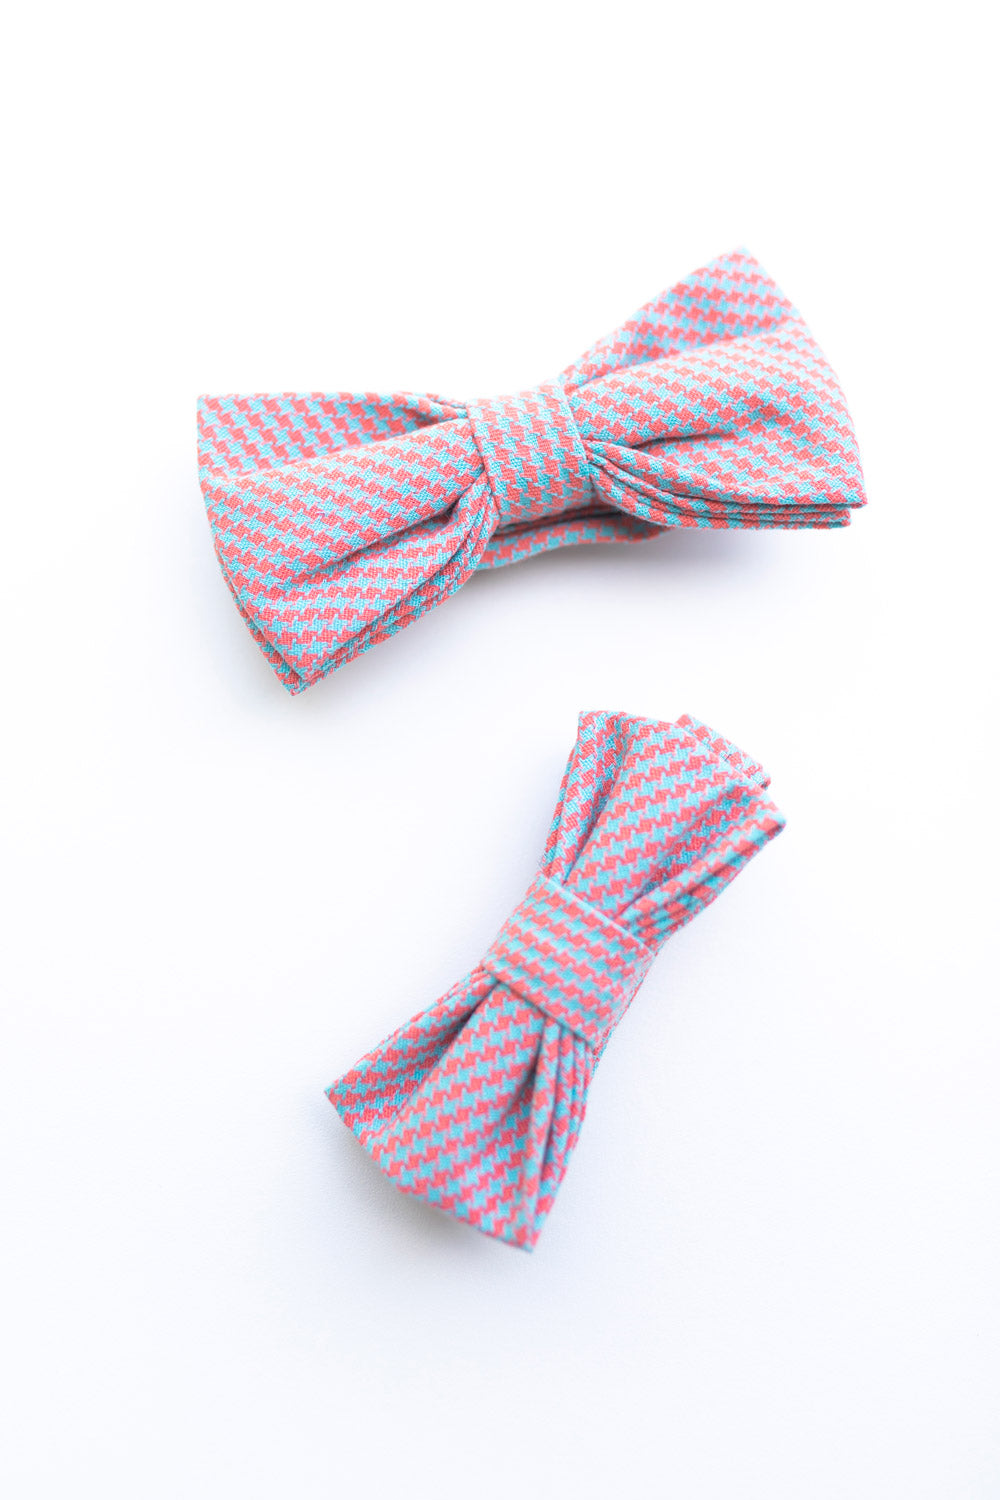 Opal Weave adult and kid size bow ties photographed together. 